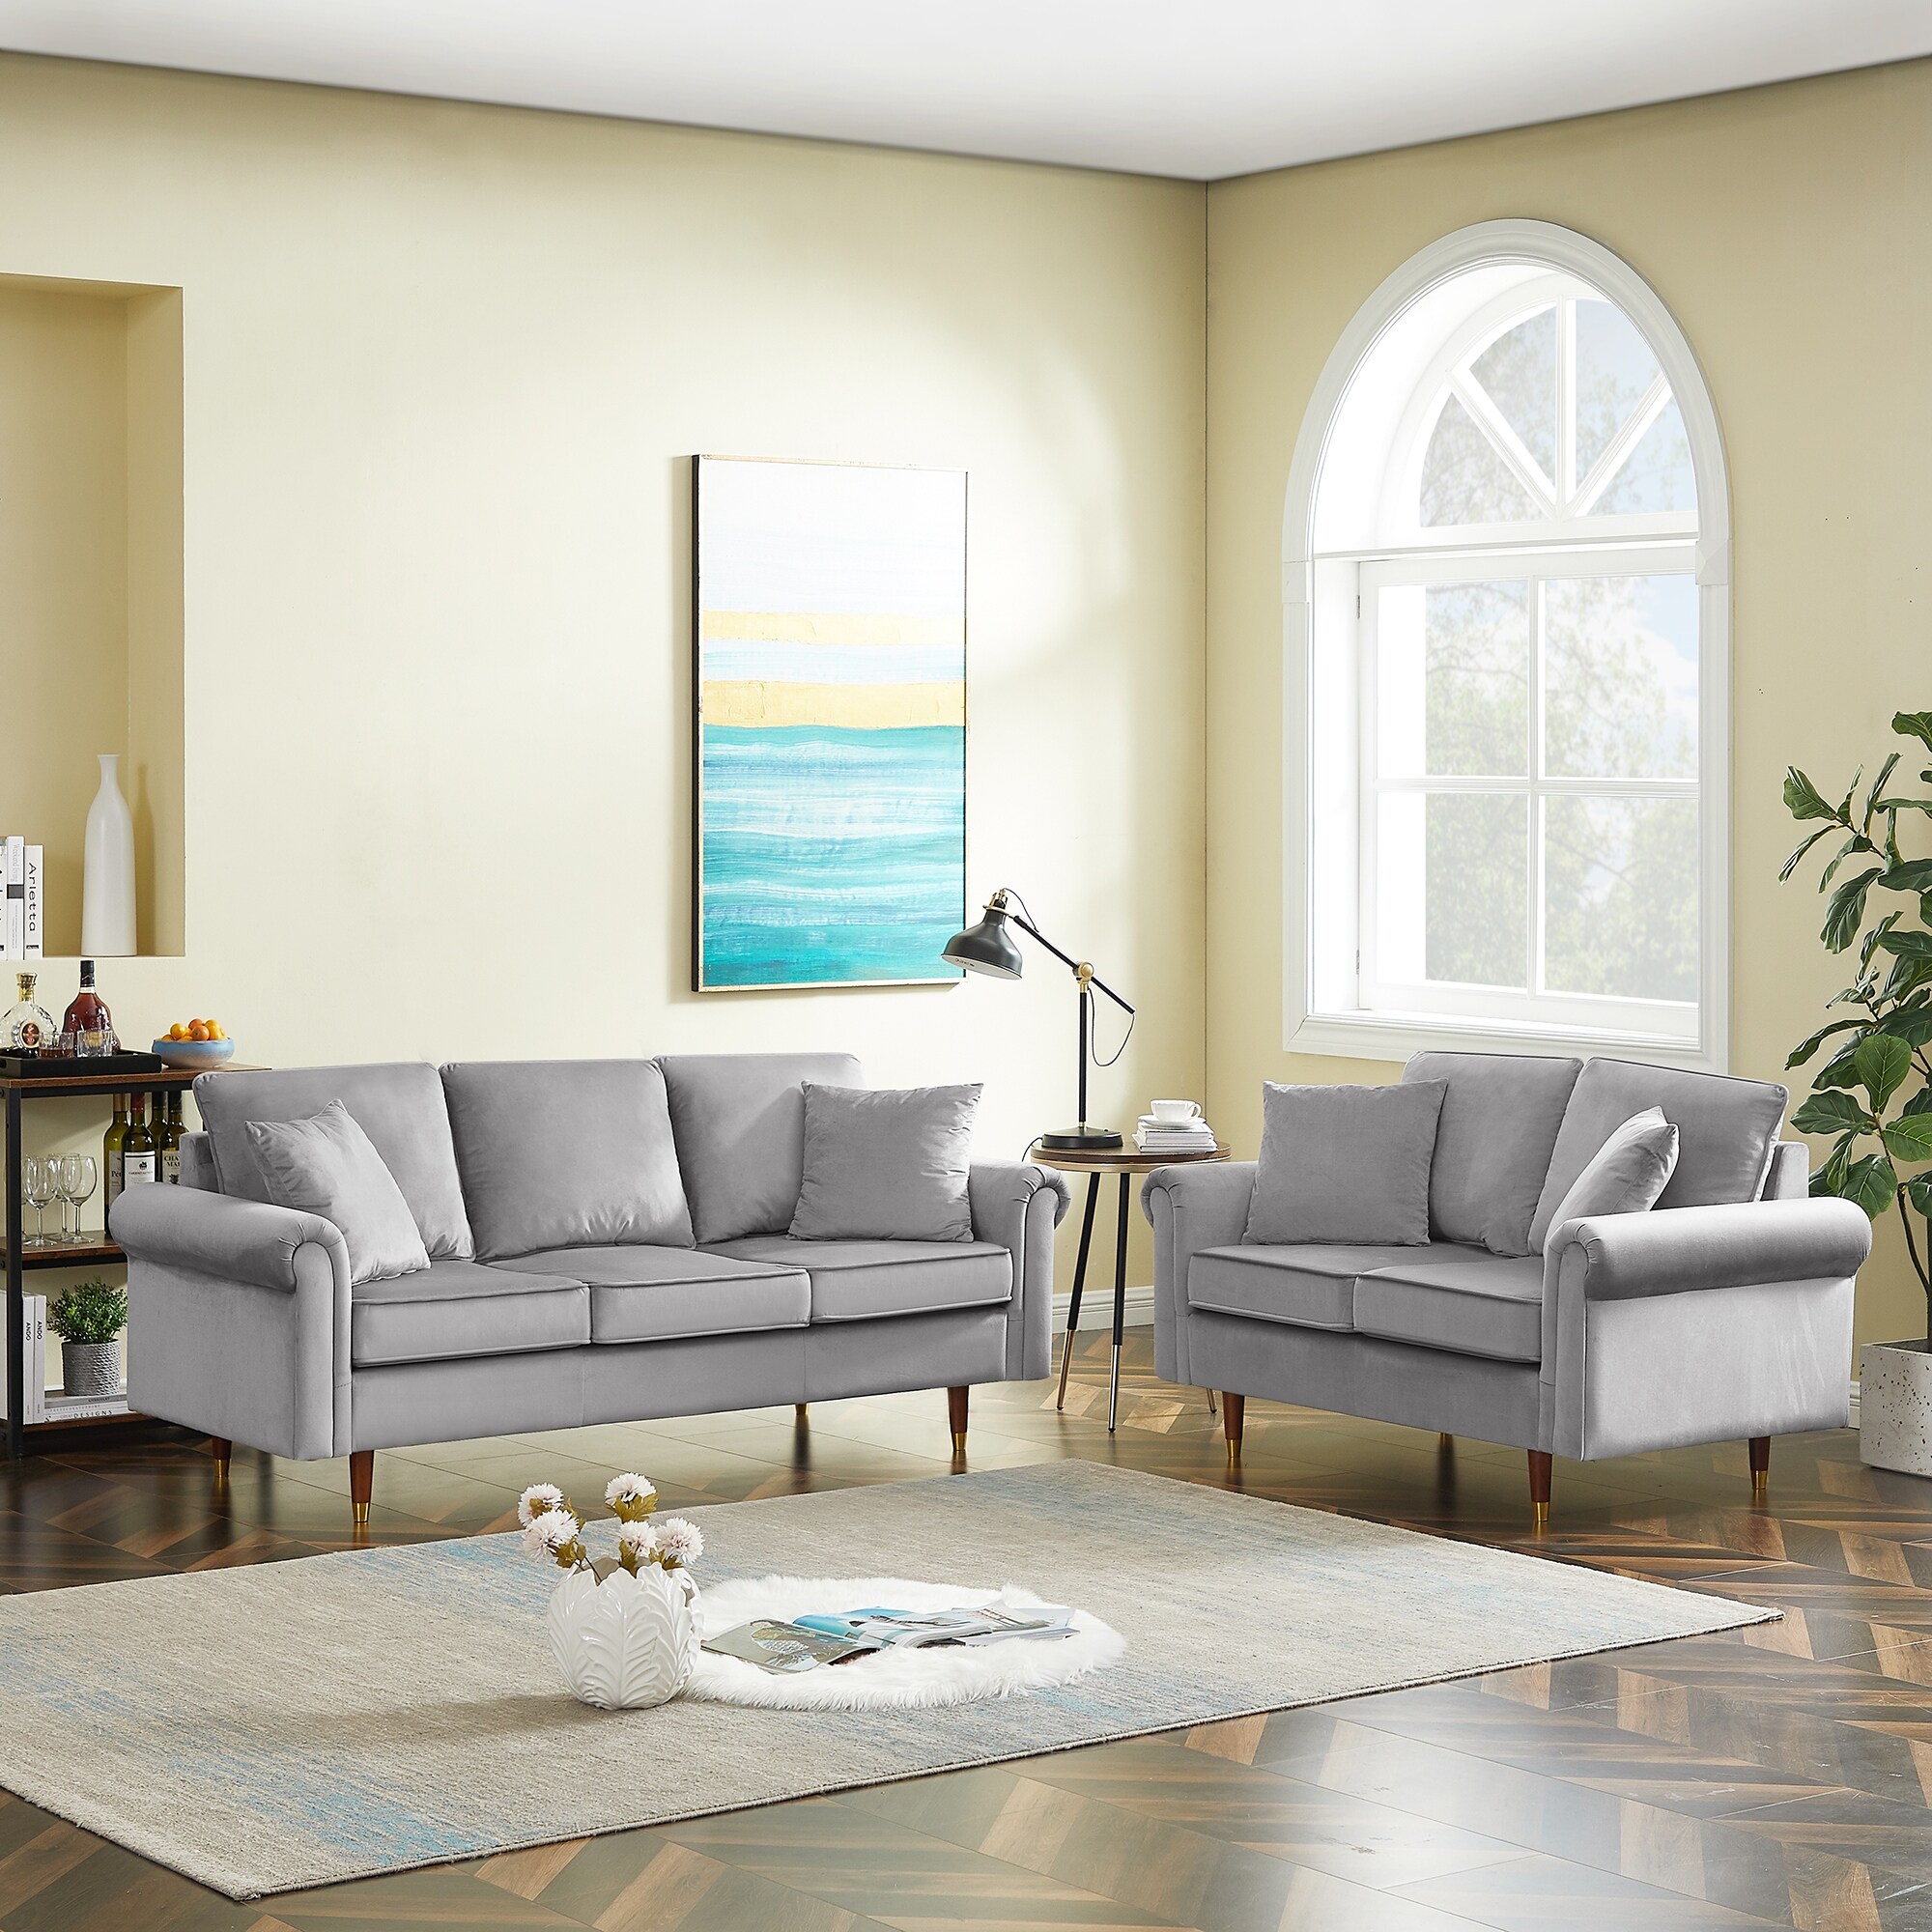 https://ak1.ostkcdn.com/images/products/is/images/direct/0c9332705ebda614087597291e537519ba3e182a/Modern-2-piece-Set-Velvet-Upholstered-Sofa-Furniture-with-2-Seater-and-3-Seater-Sofa.jpg